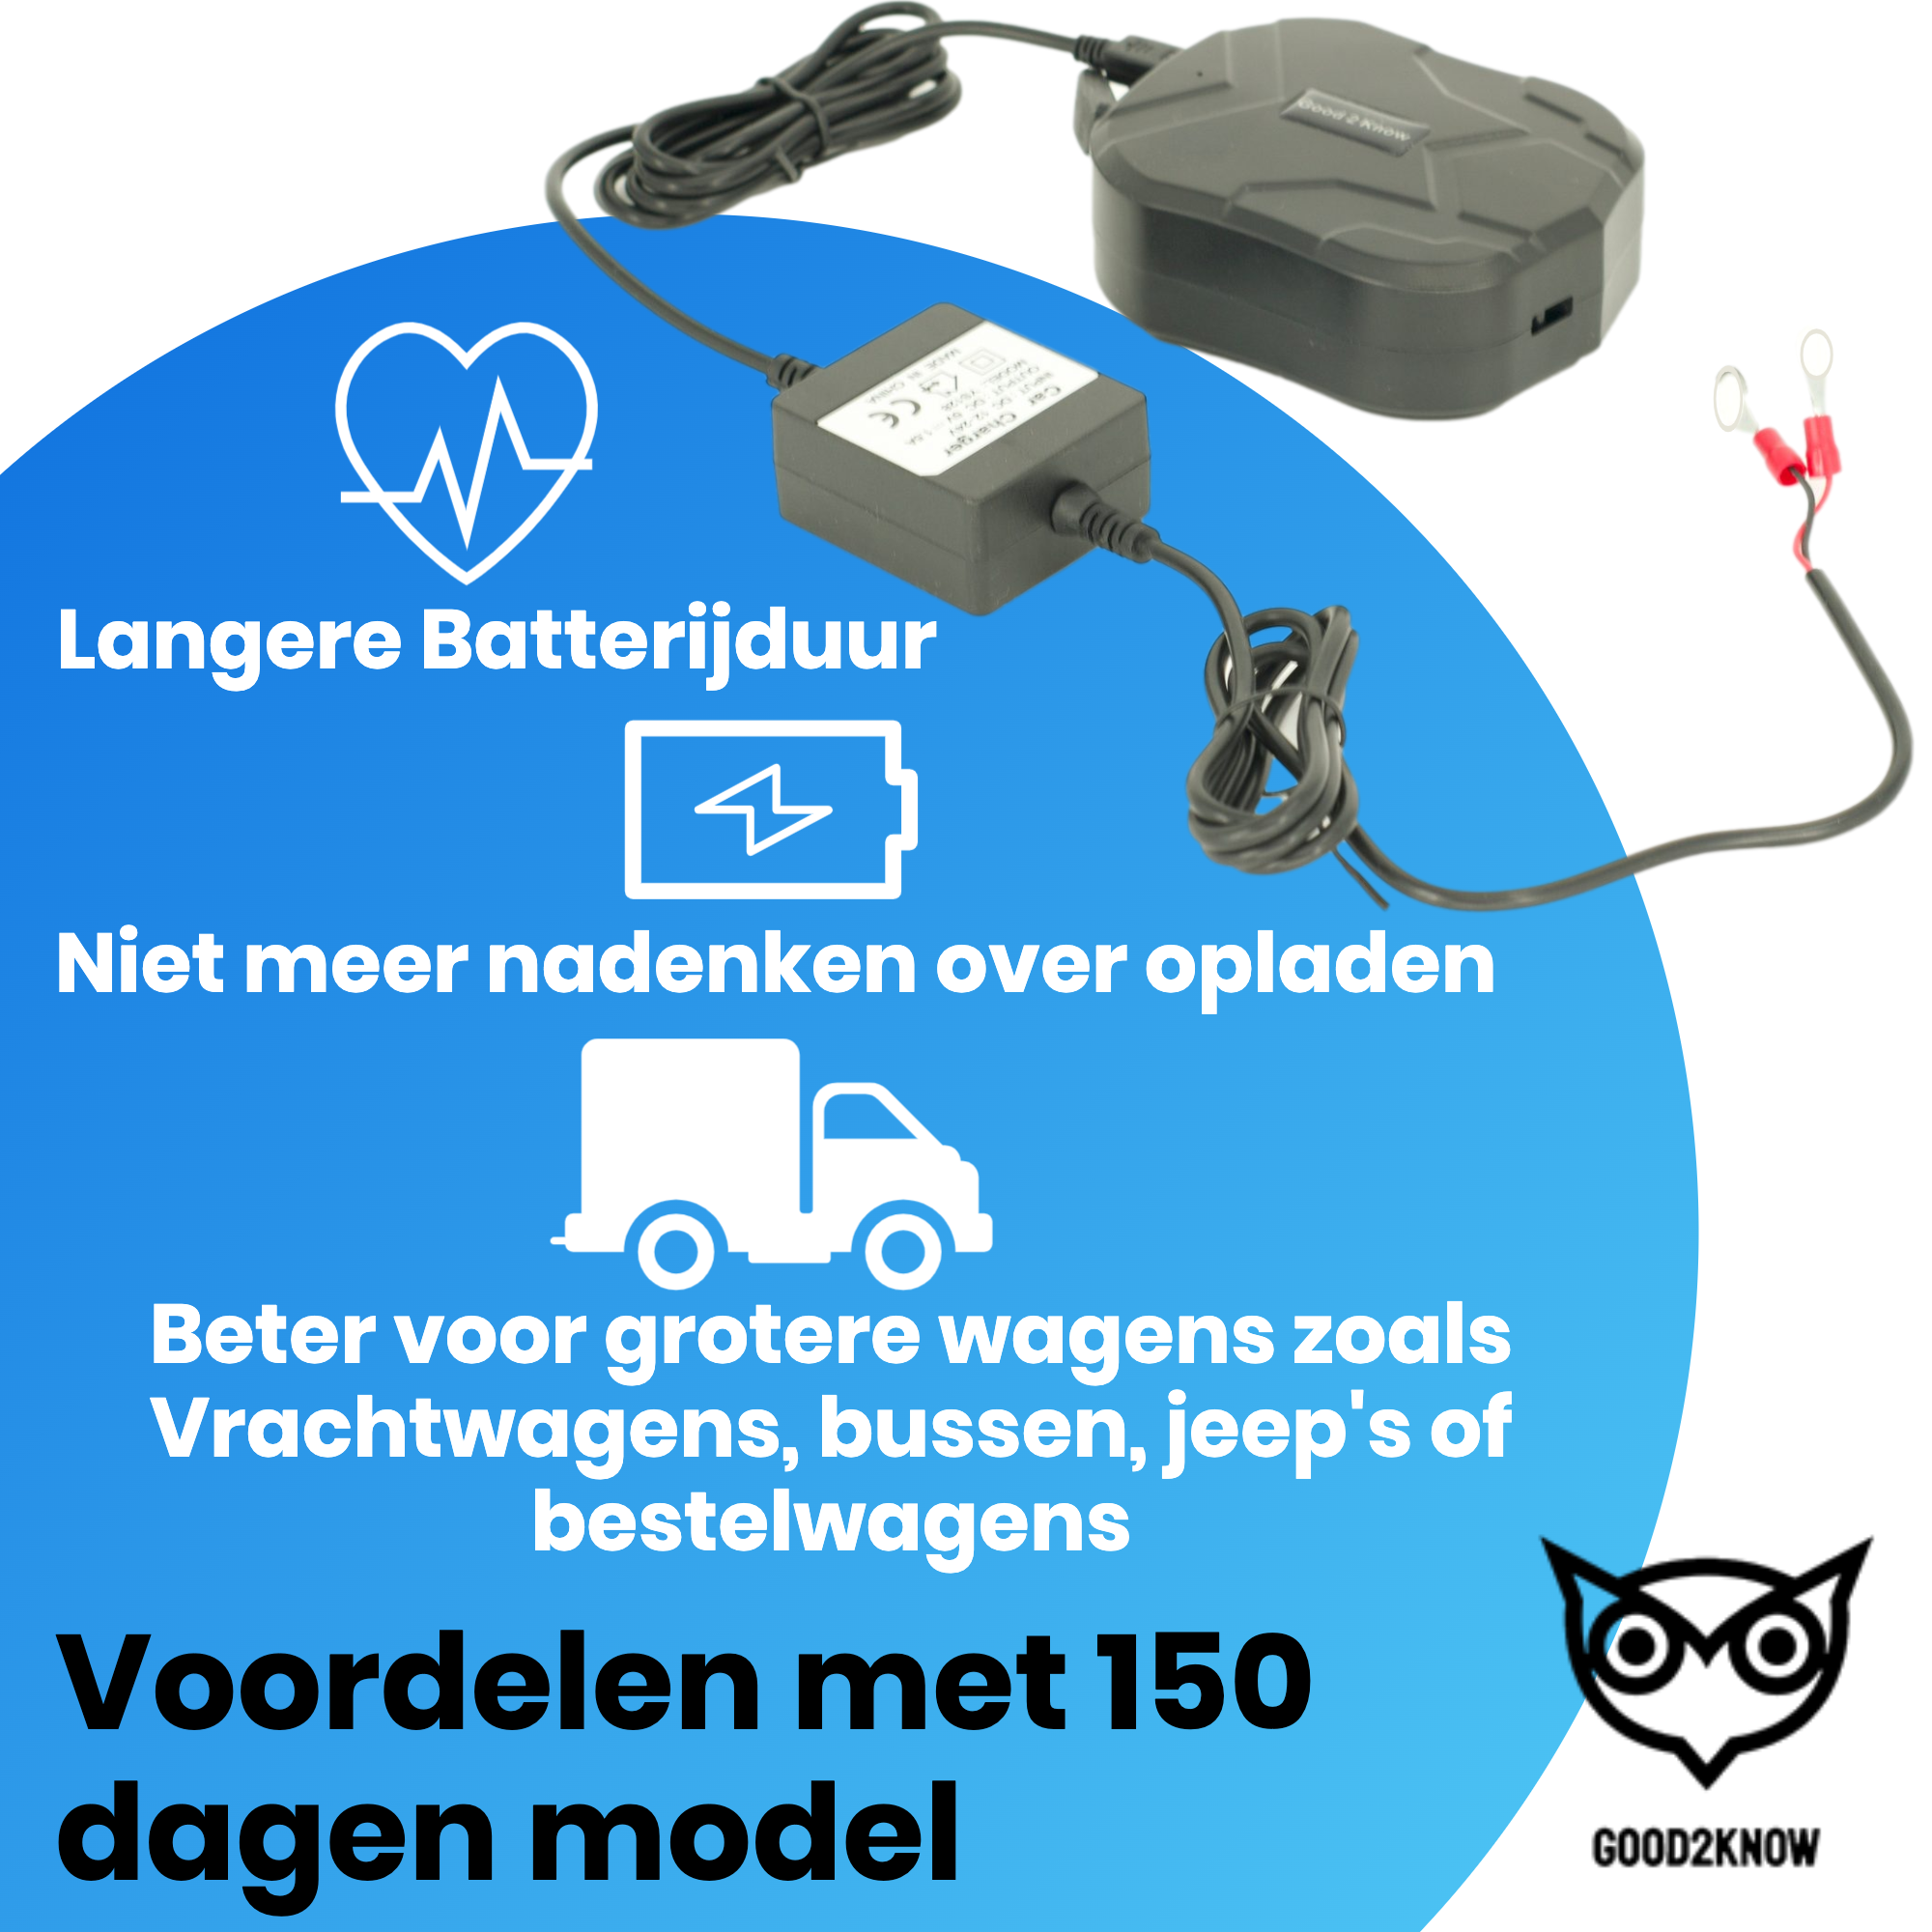 Acculader voor GPS Trackers Autolader Oplader Gps